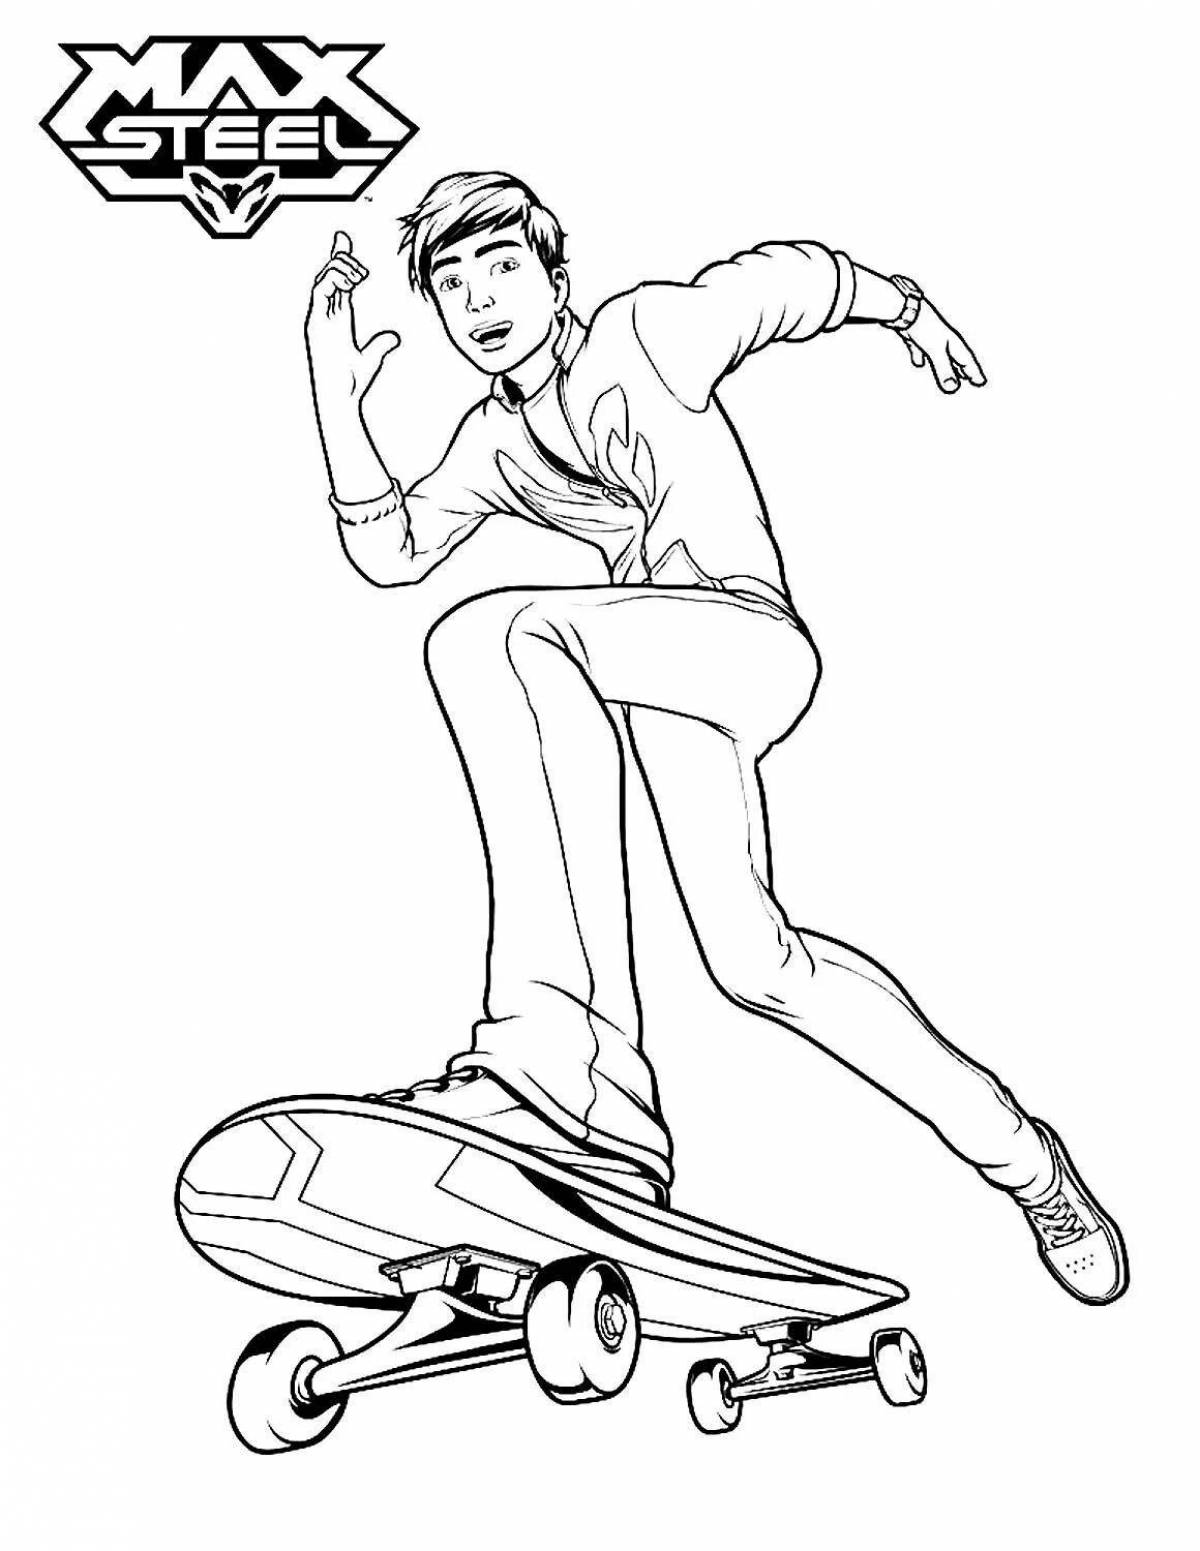 Nimble skateboarder coloring page